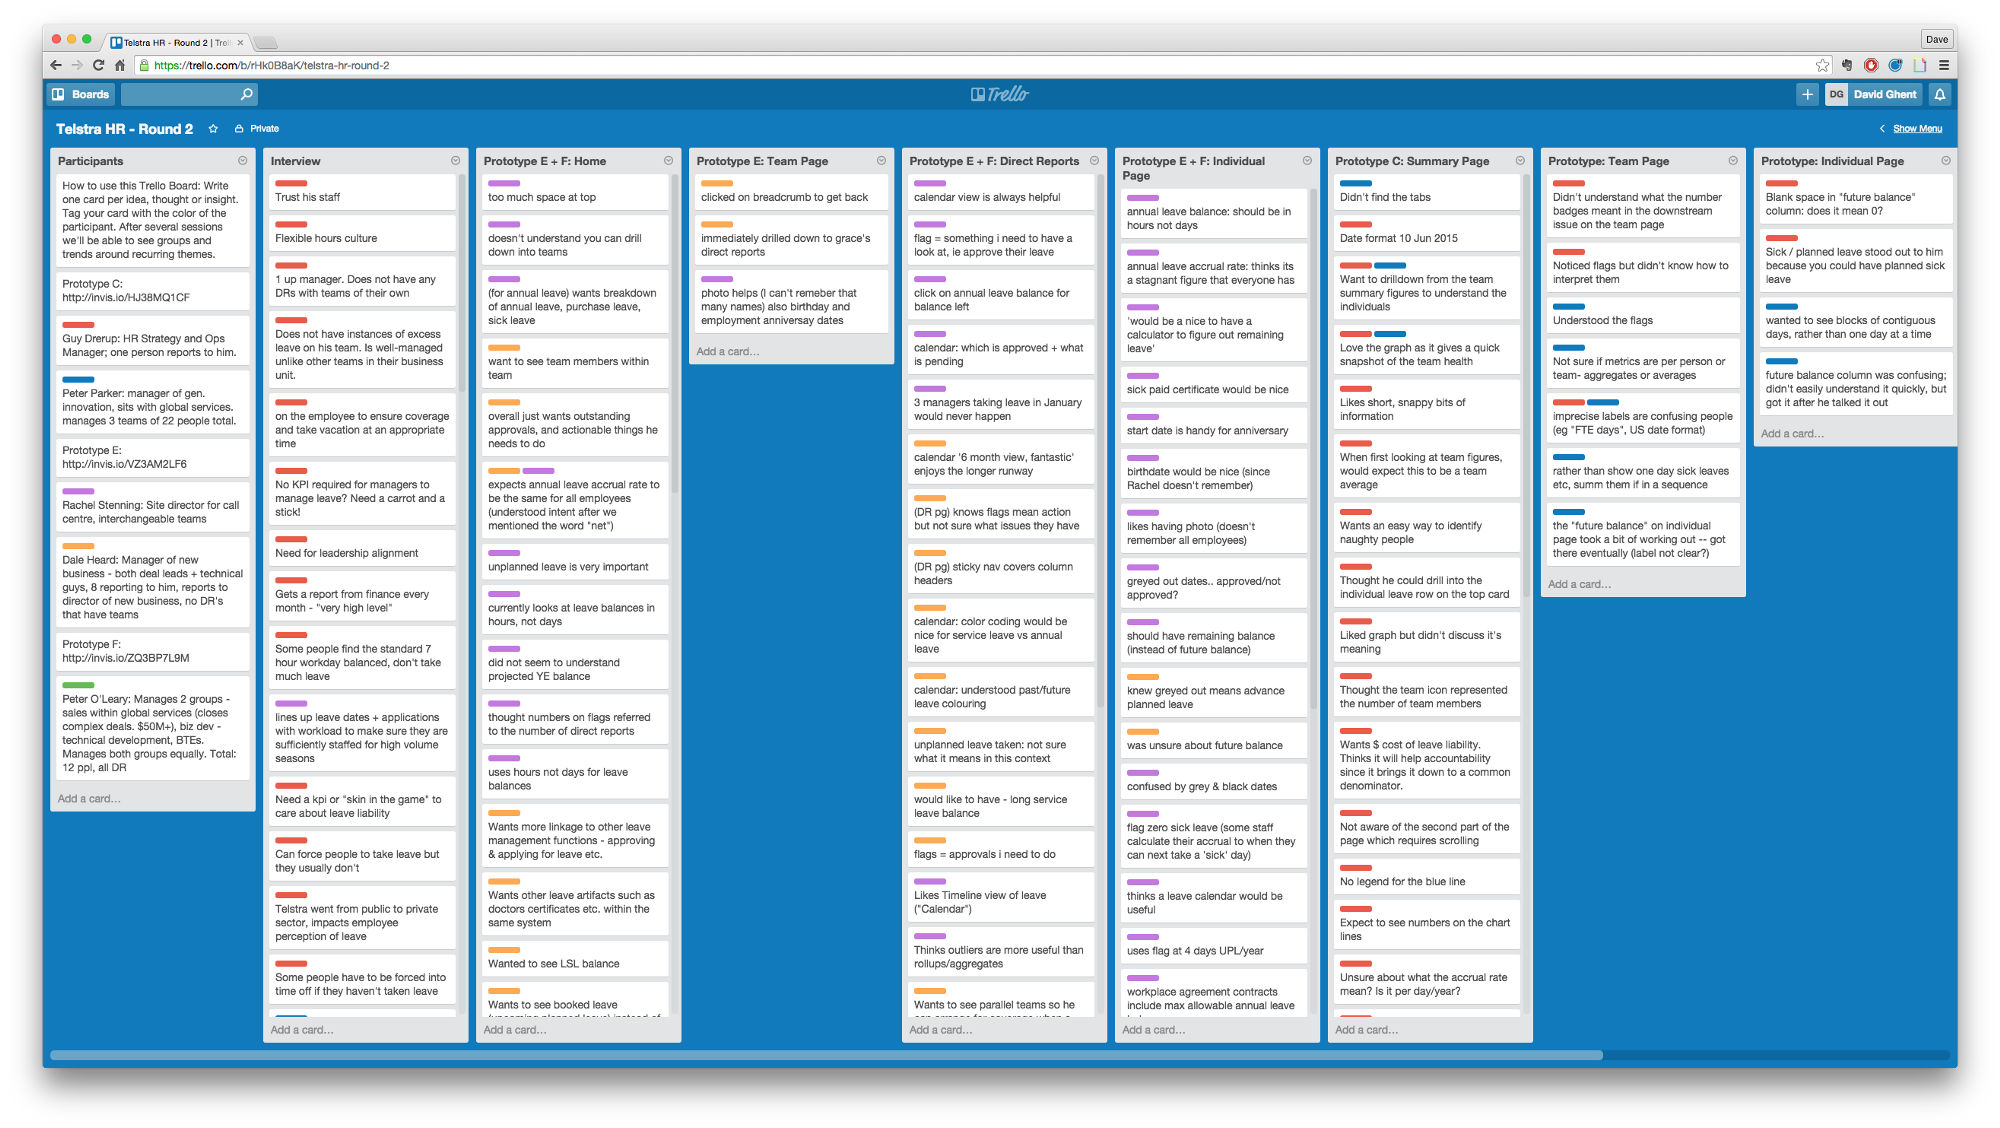 trello-board-user-research-example.png